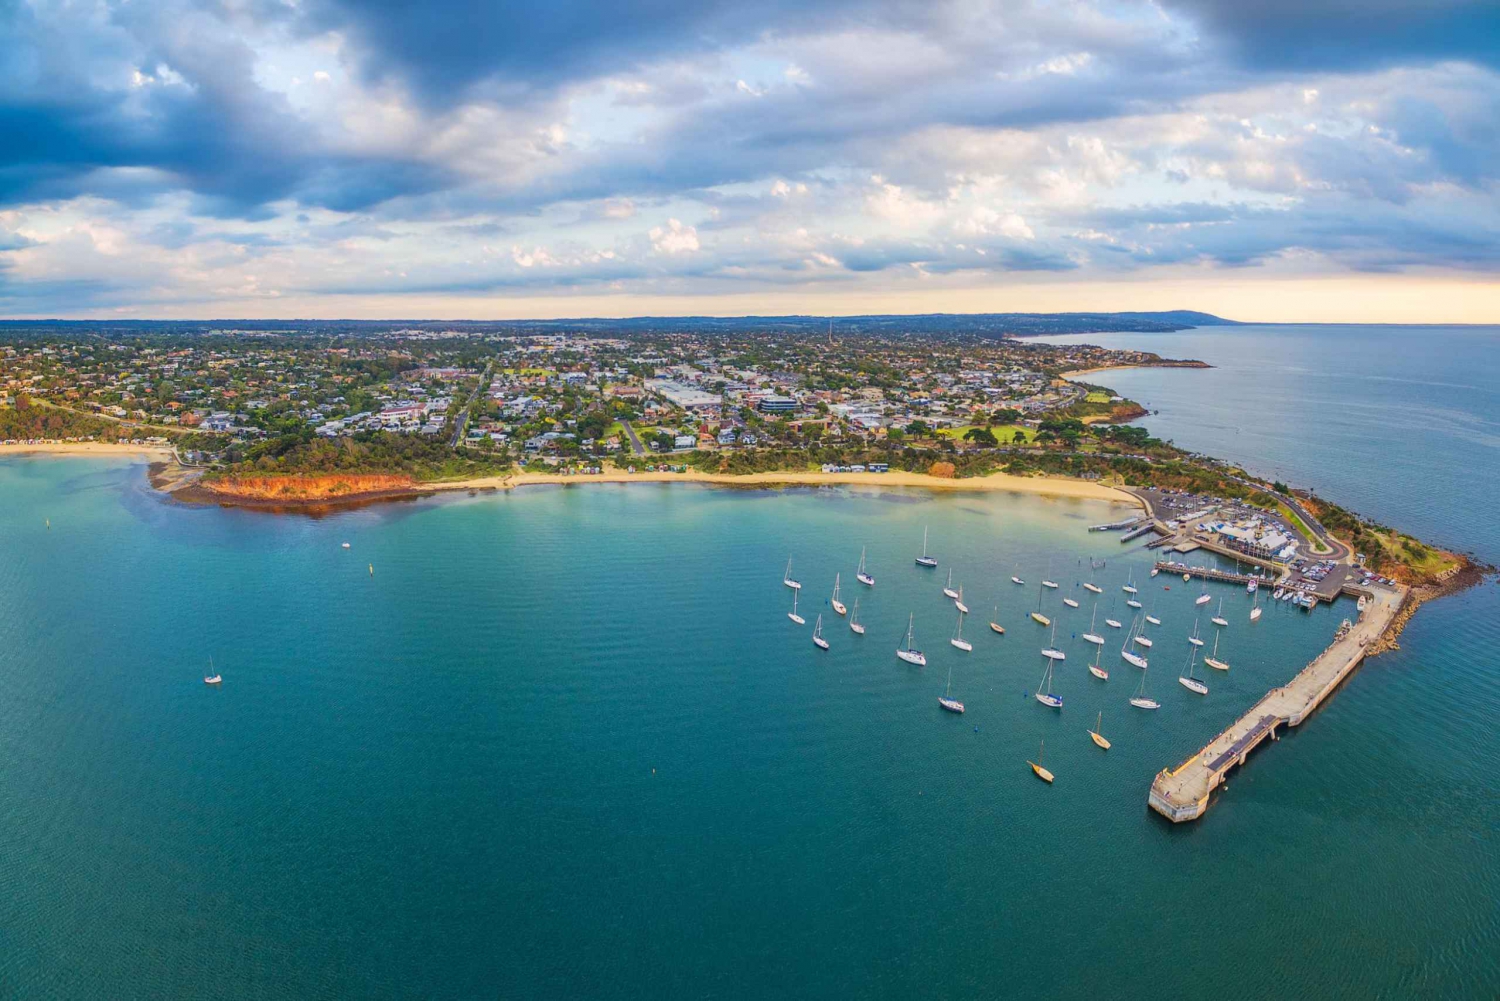 Mornington Peninsula Scenic Bus Tour with Chairlift & Lunch